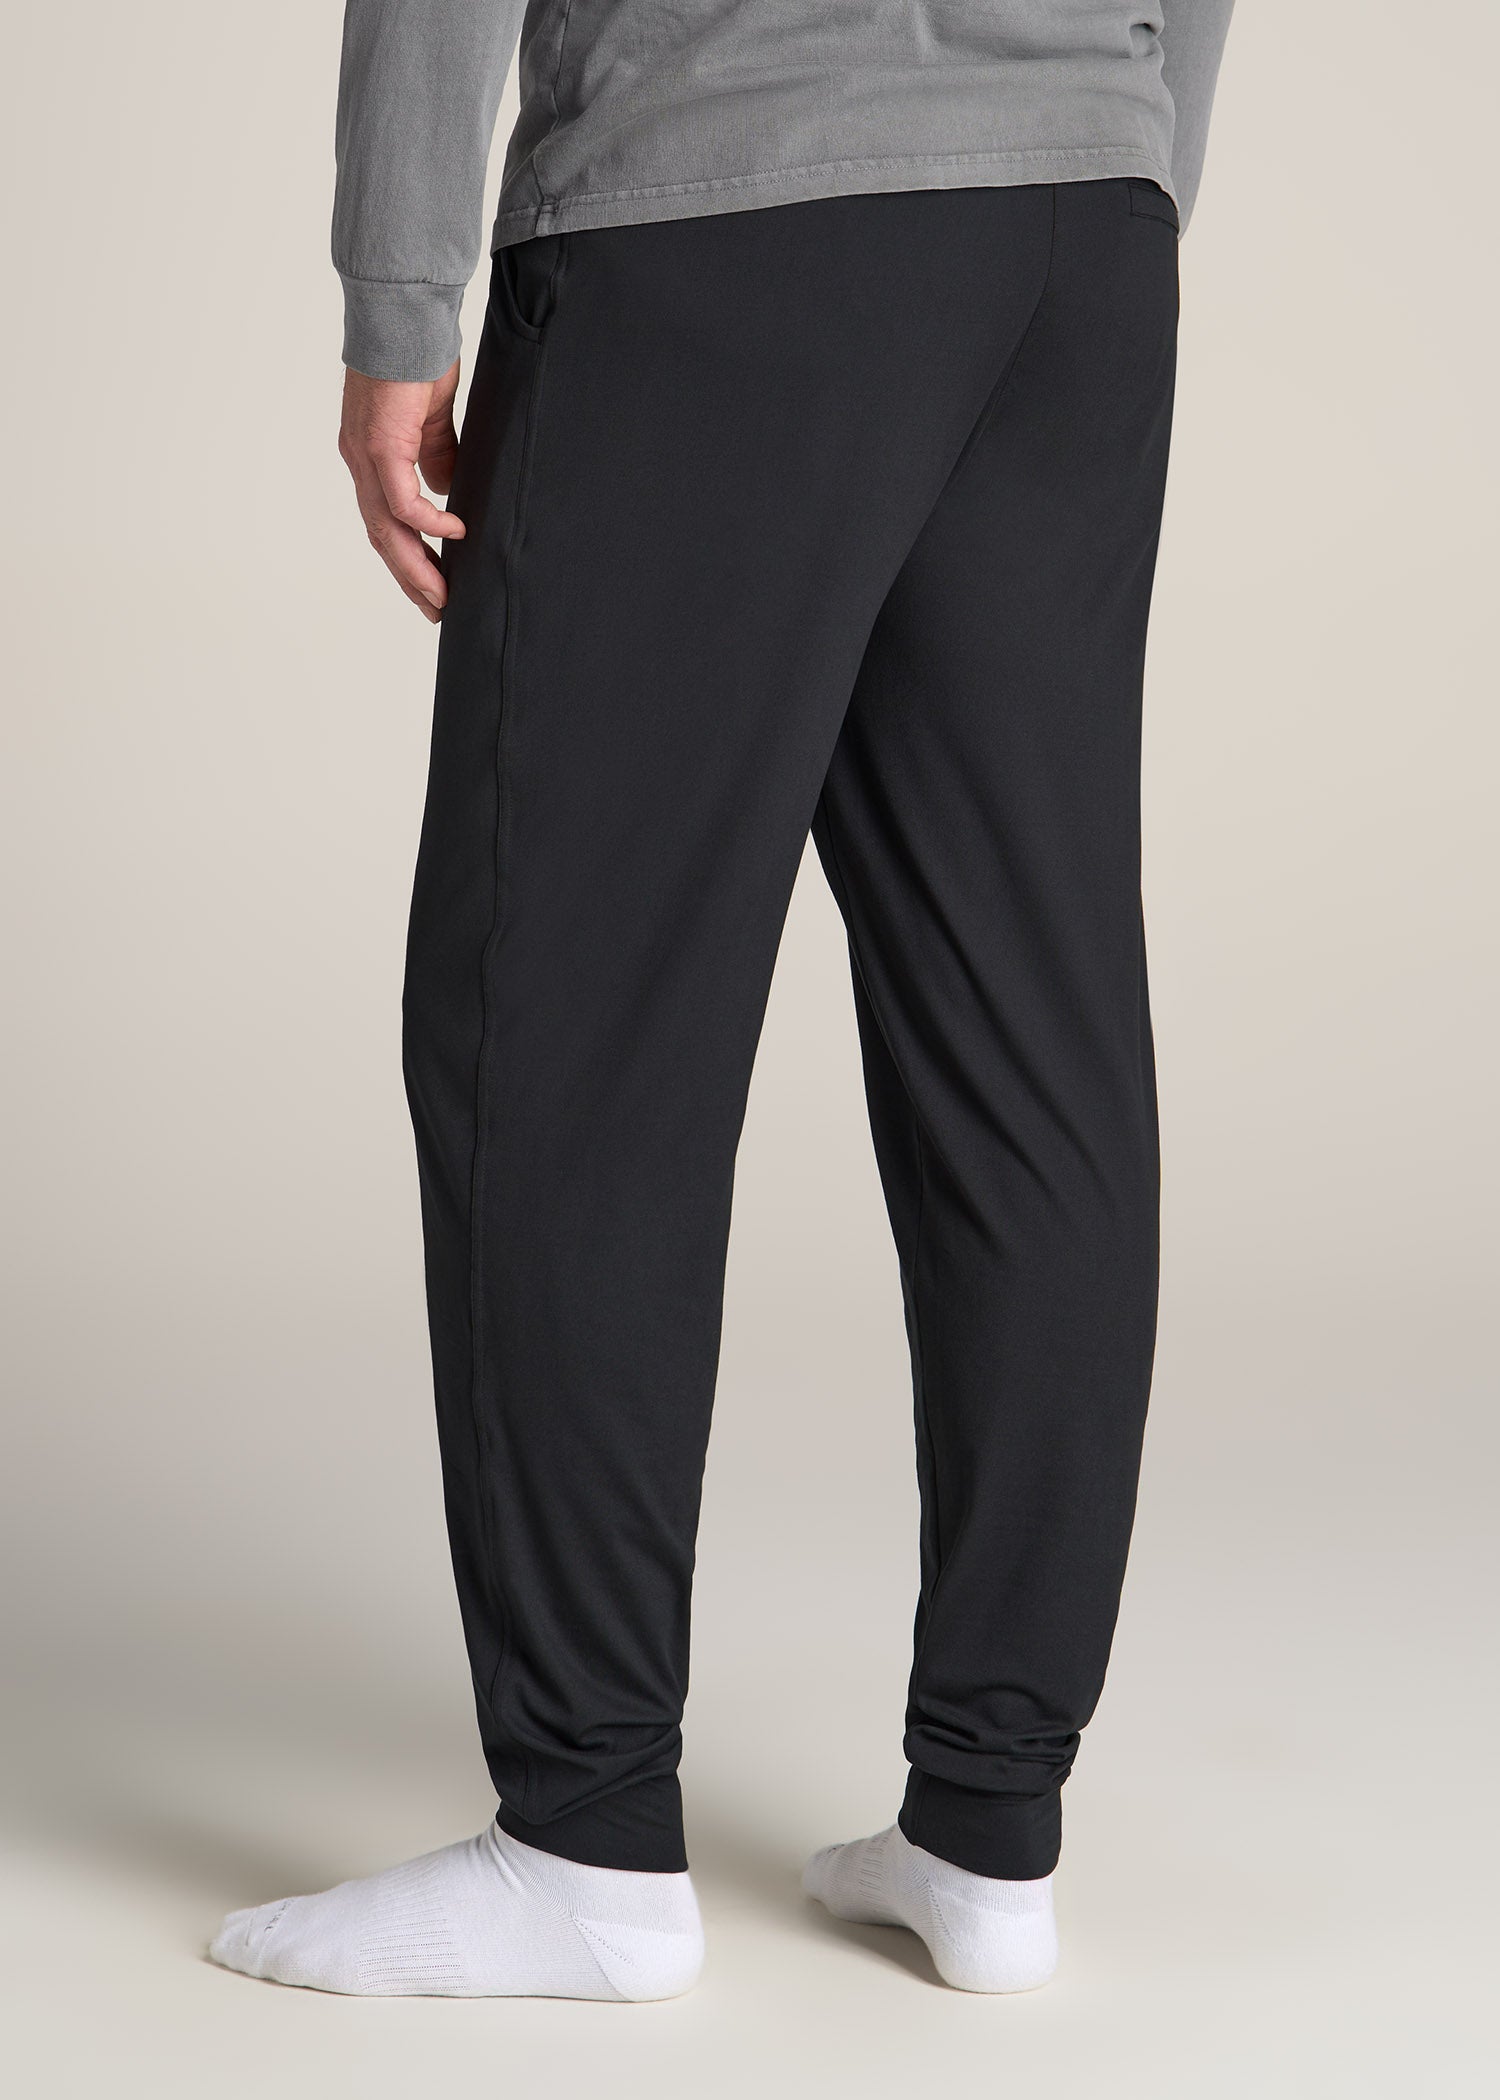 Weekender Stretch Lounge Joggers for Tall Men in Charcoal Mix